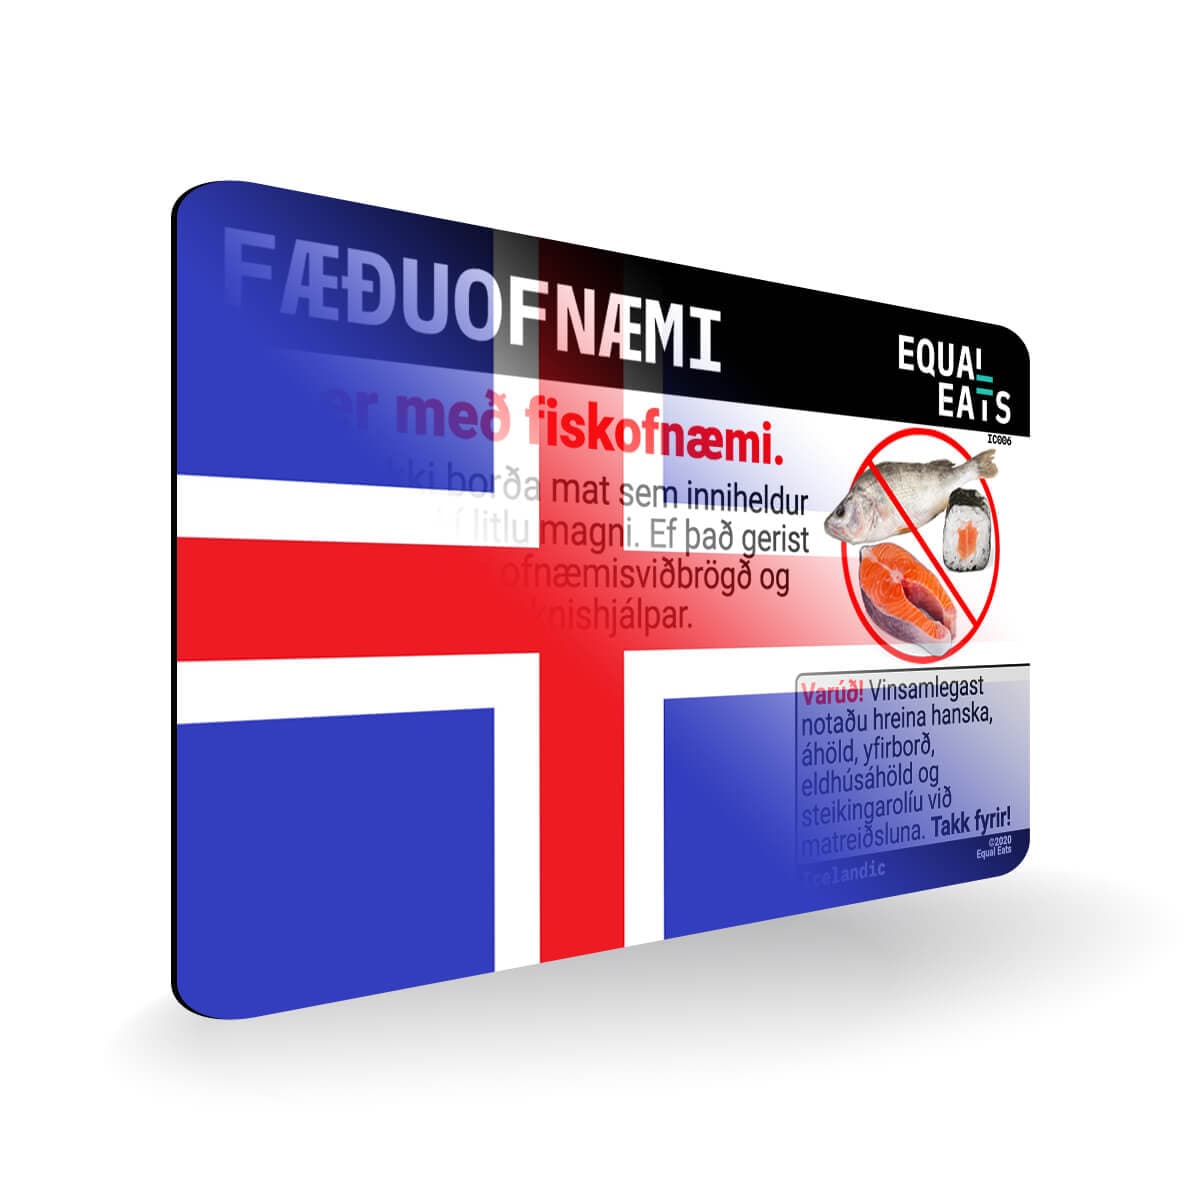 Fish Allergy in Icelandic. Fish Allergy Card for Iceland